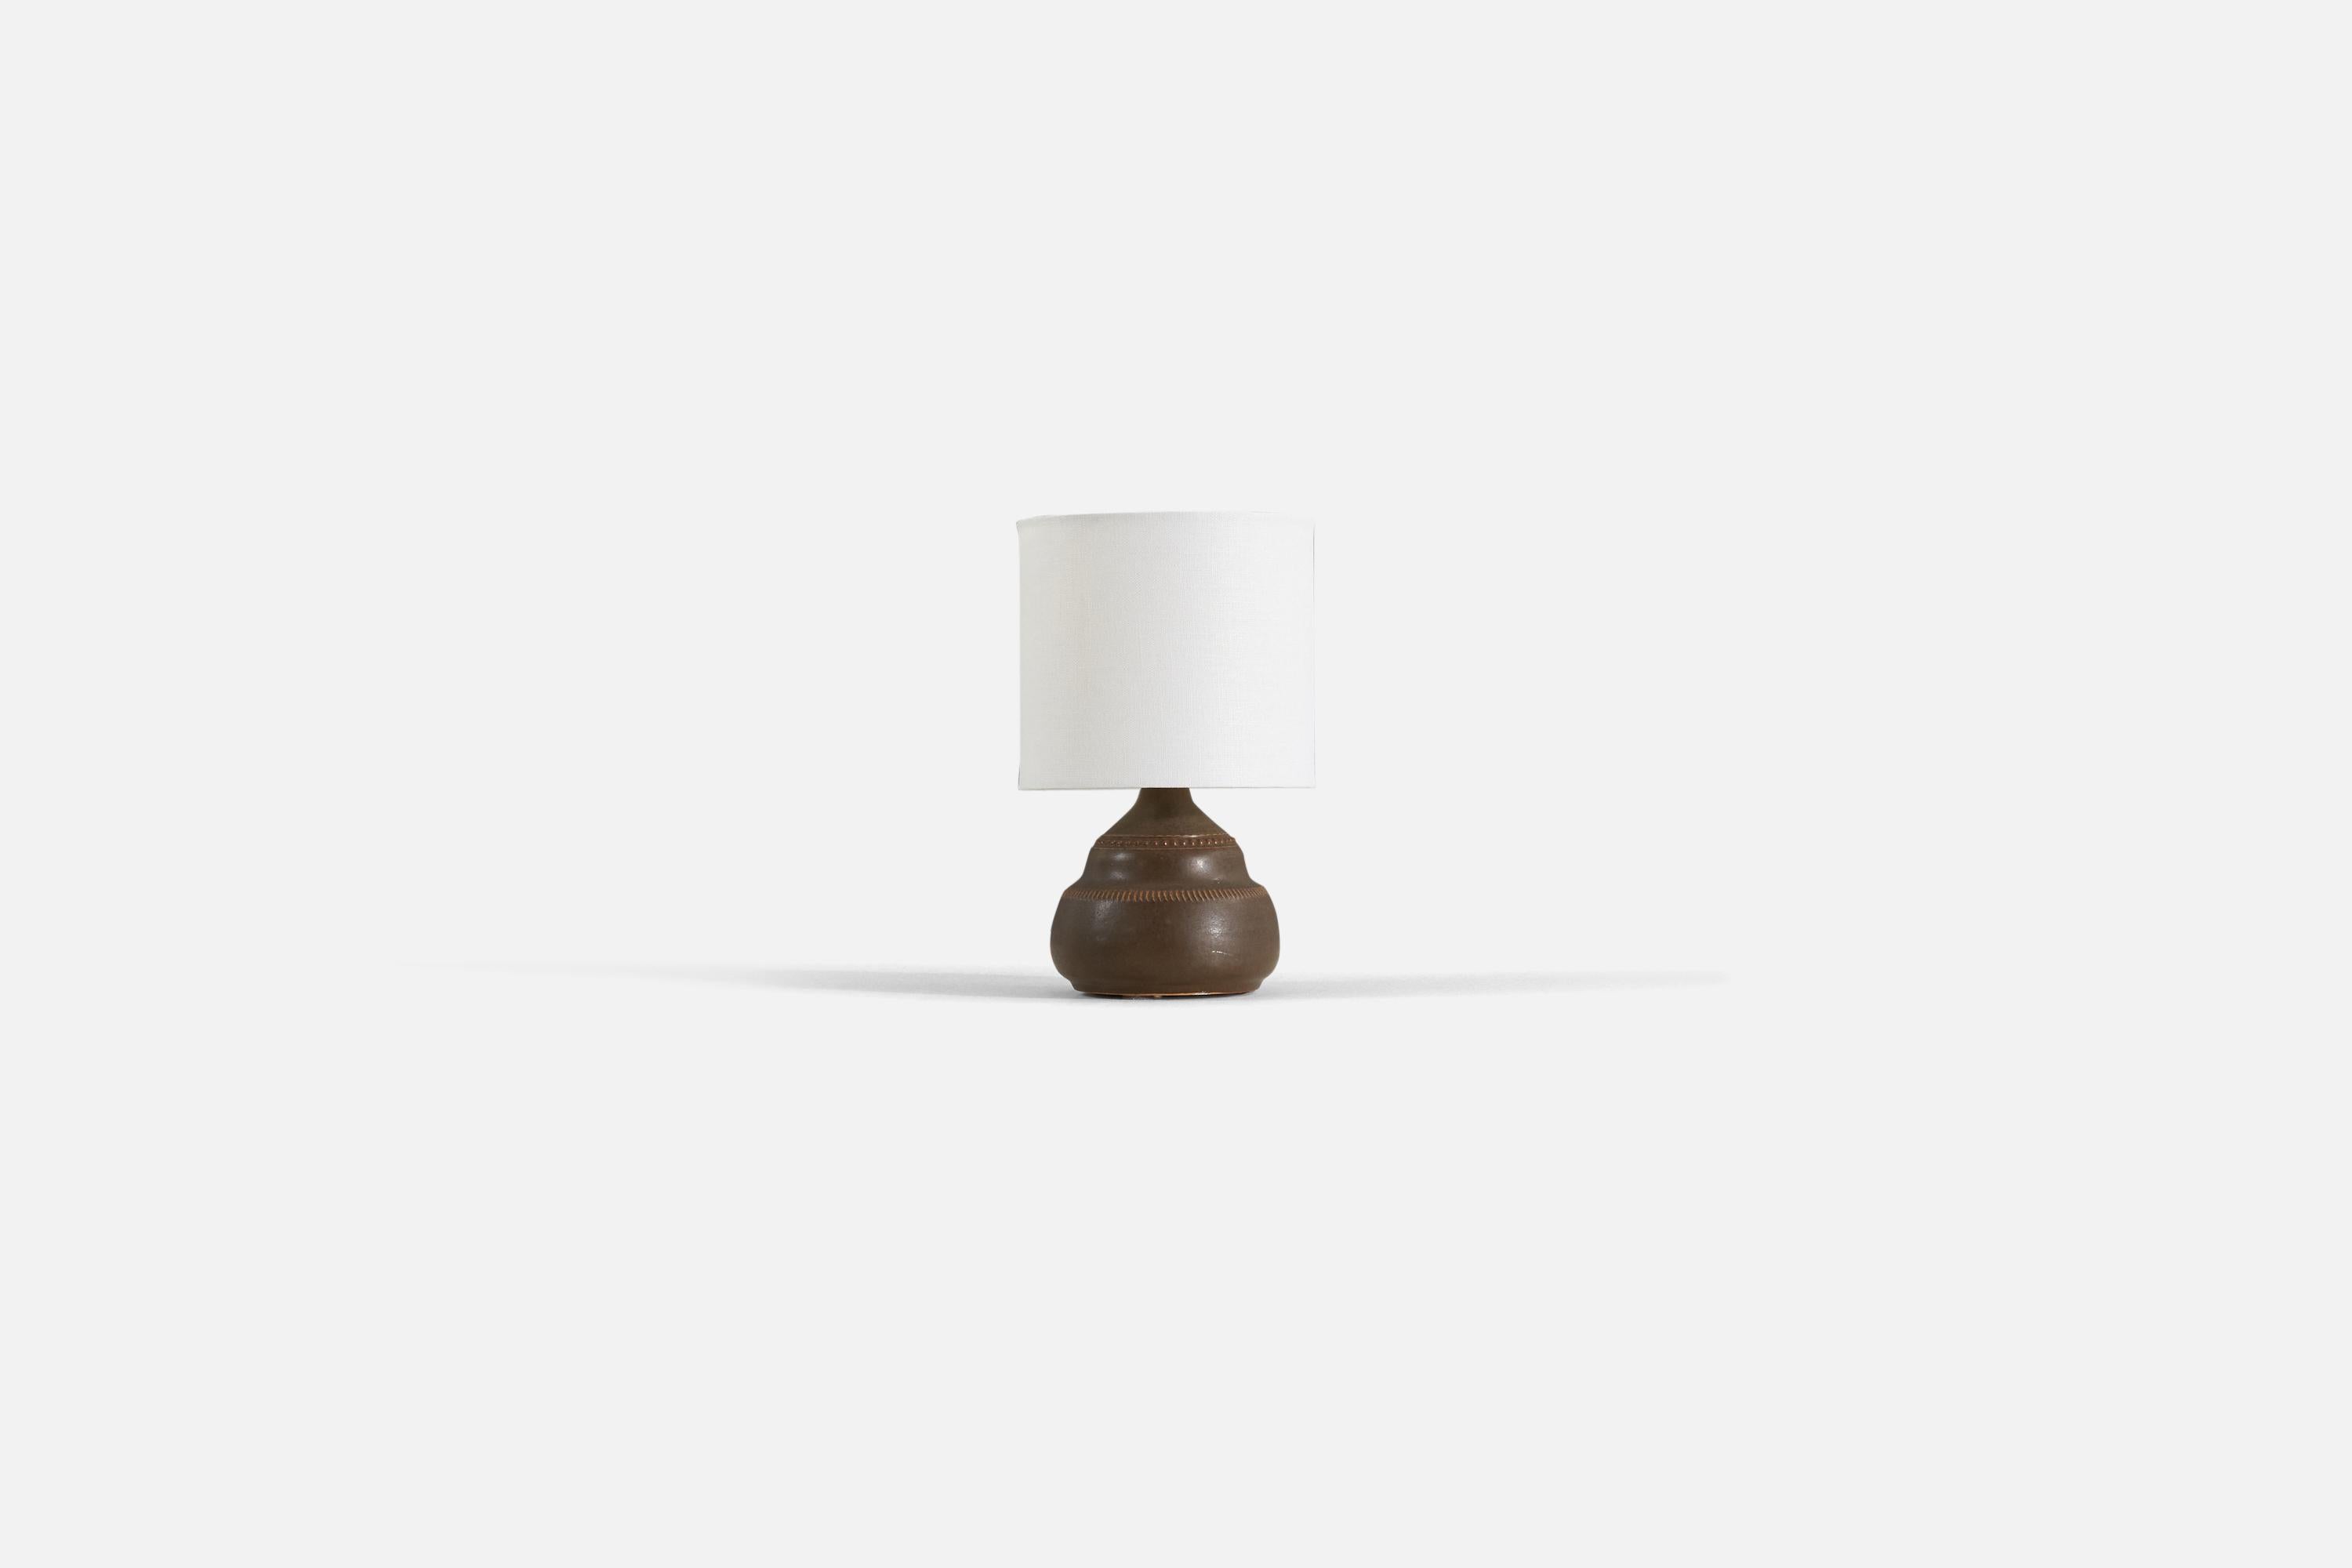 A brown glazed stoneware table lamp produced by Klase Höganäs, Sweden, 1960s.

Sold without lampshade. 

Measurements listed are of lamp.
Shade : 6 x 6 x 5.5
Lamp with shade : 9.75 x 6 x 6.